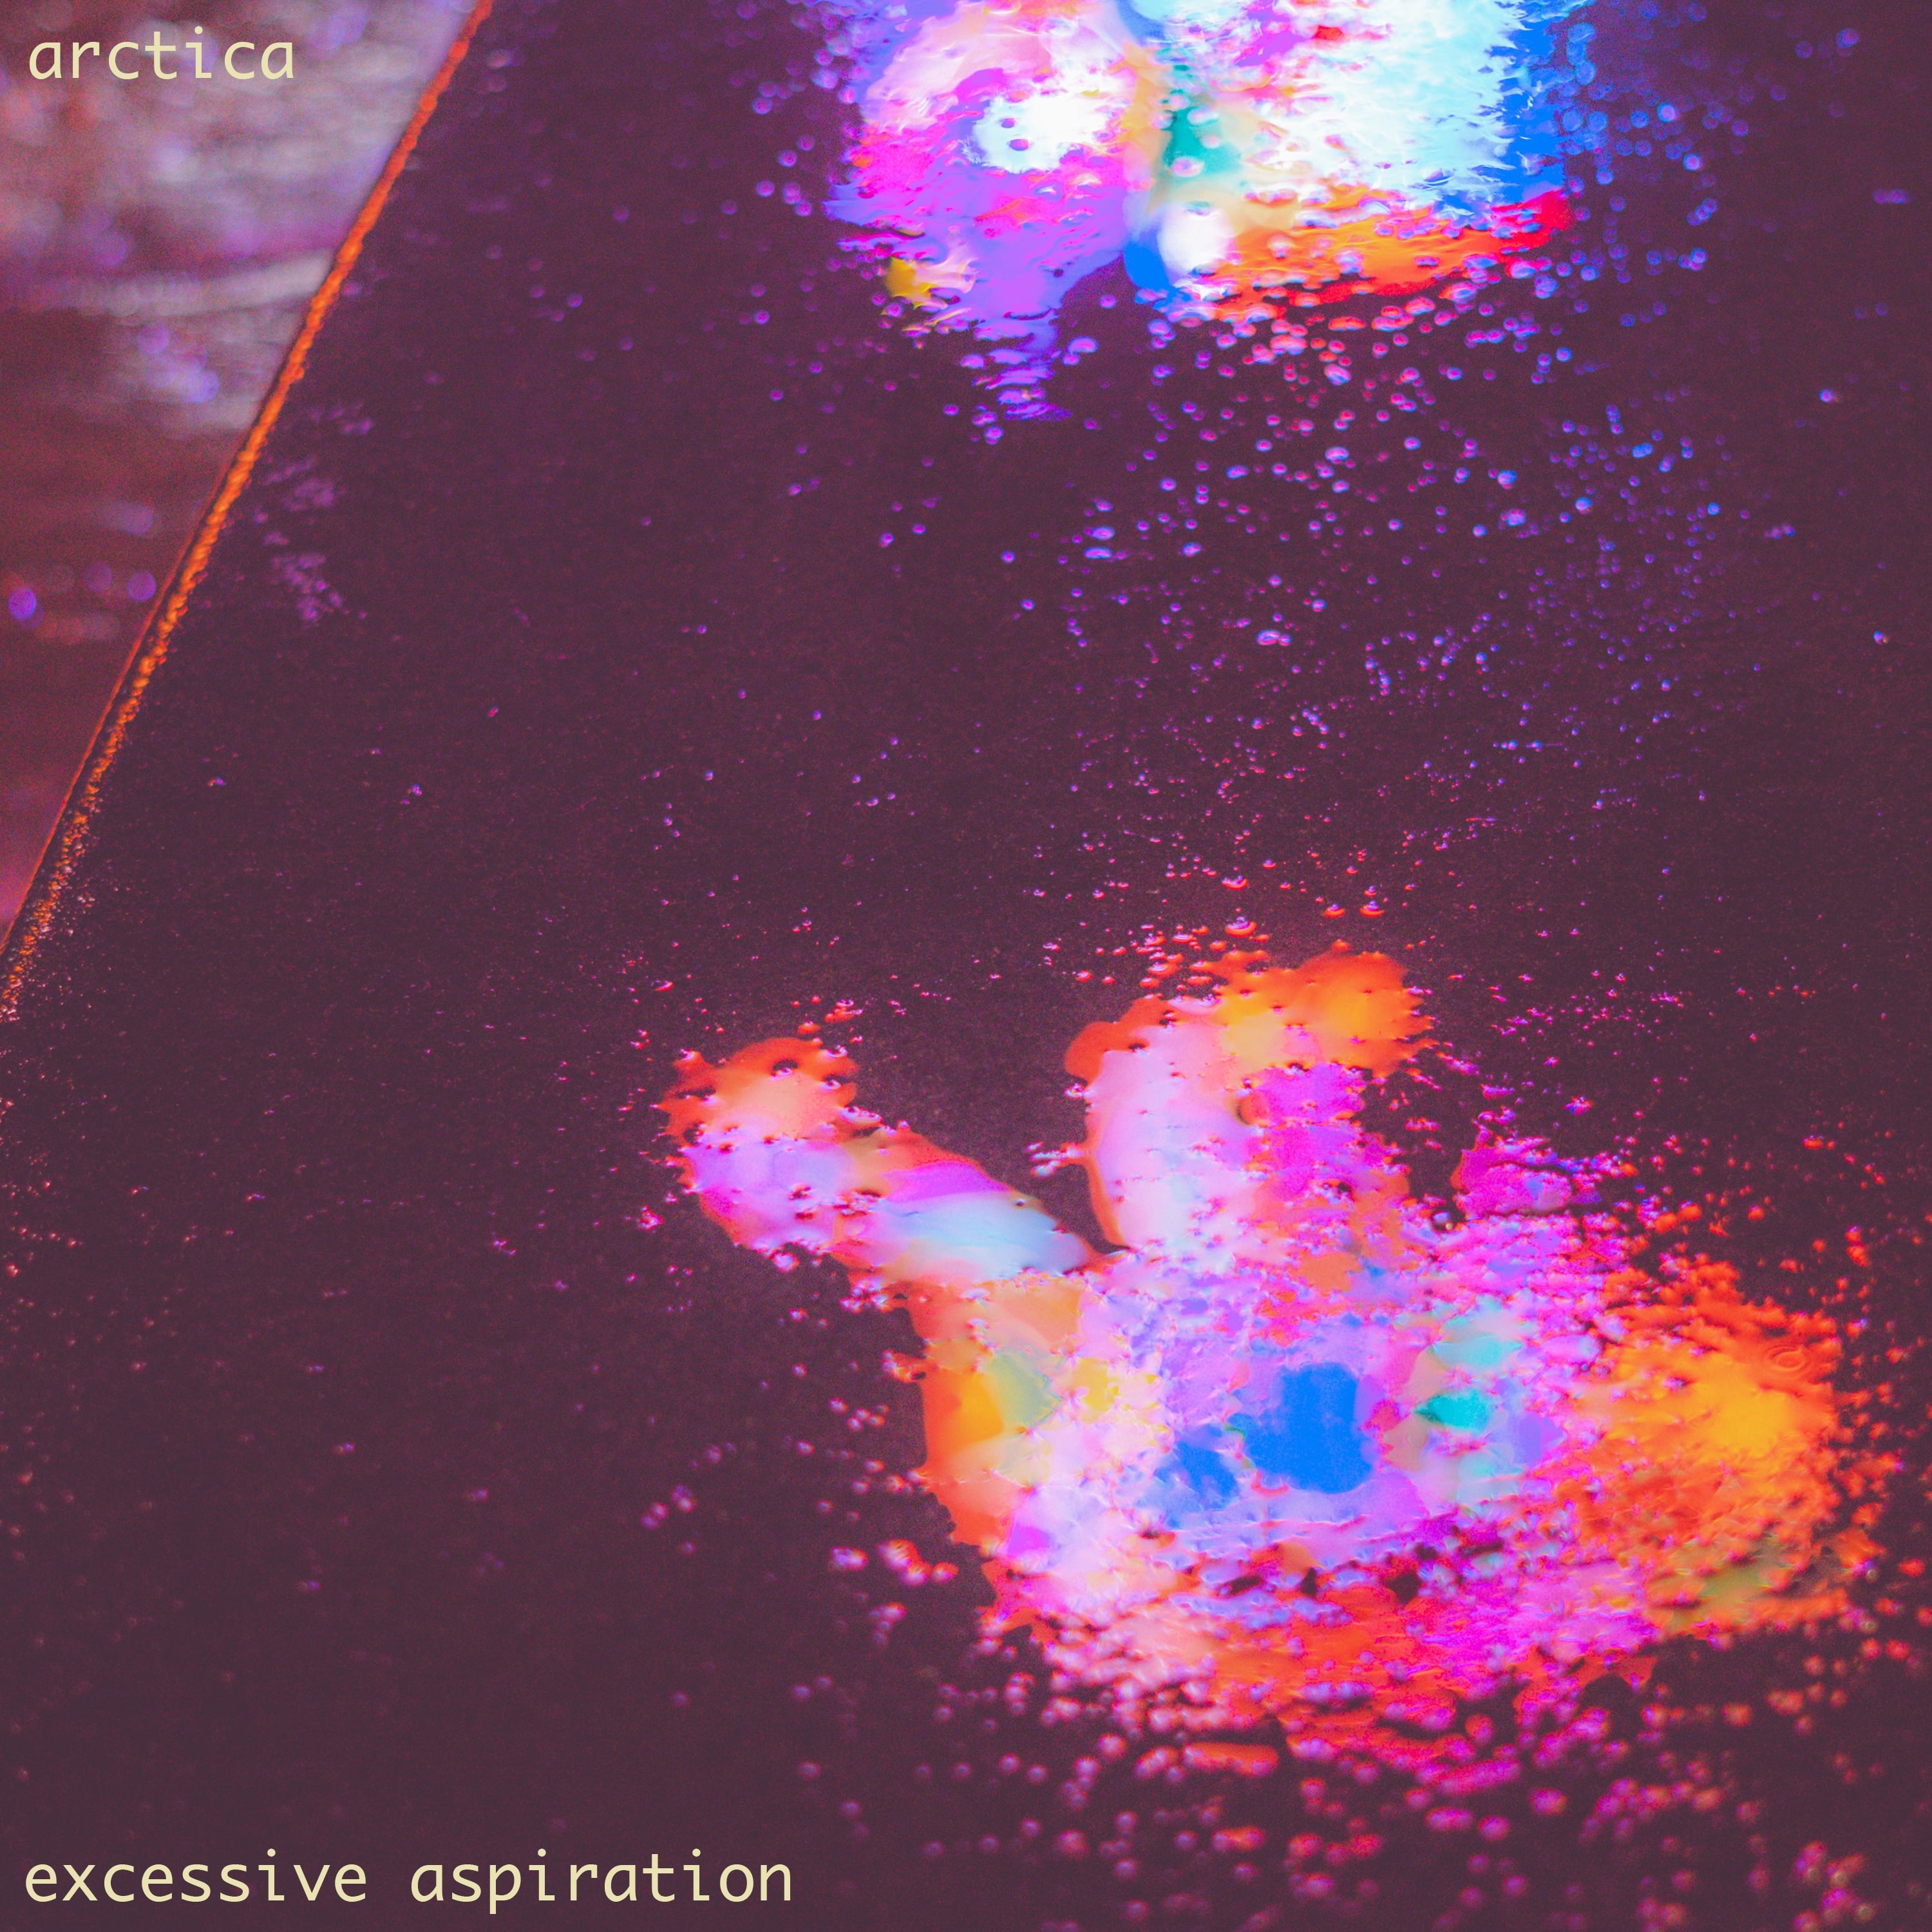 The cover of 'Excessive_Aspiration' by arctica.